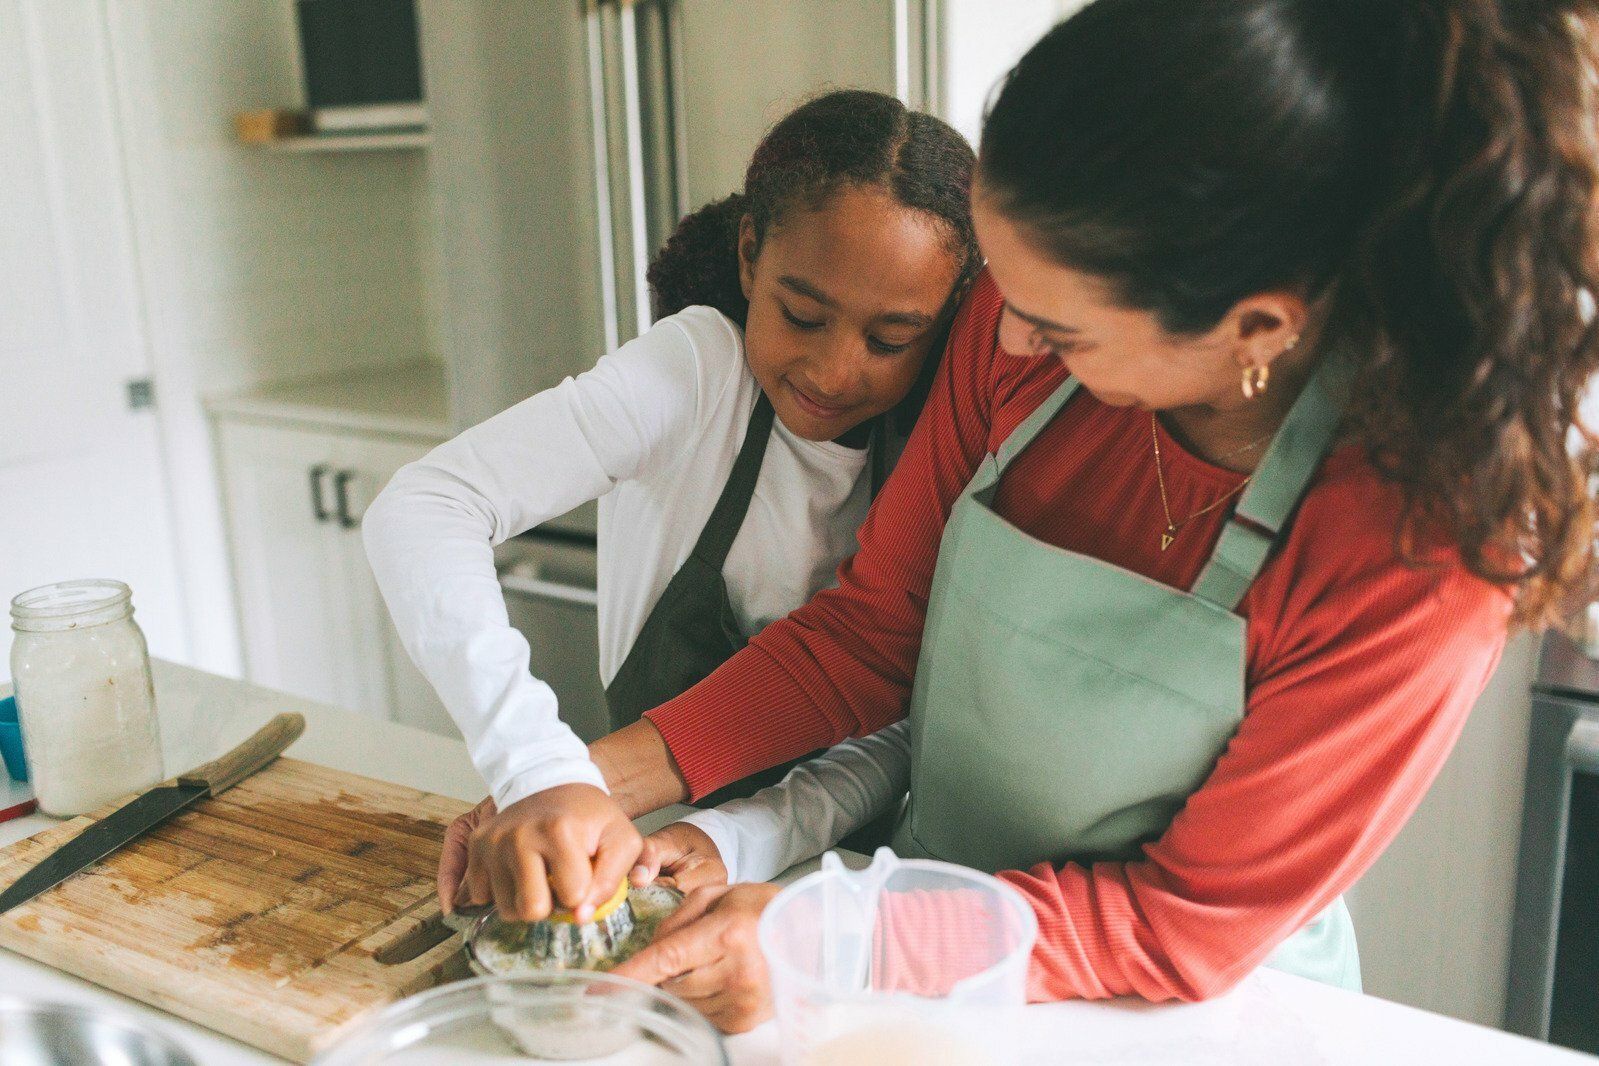 A woman and girl in aprons making dough in a bright kitchen.